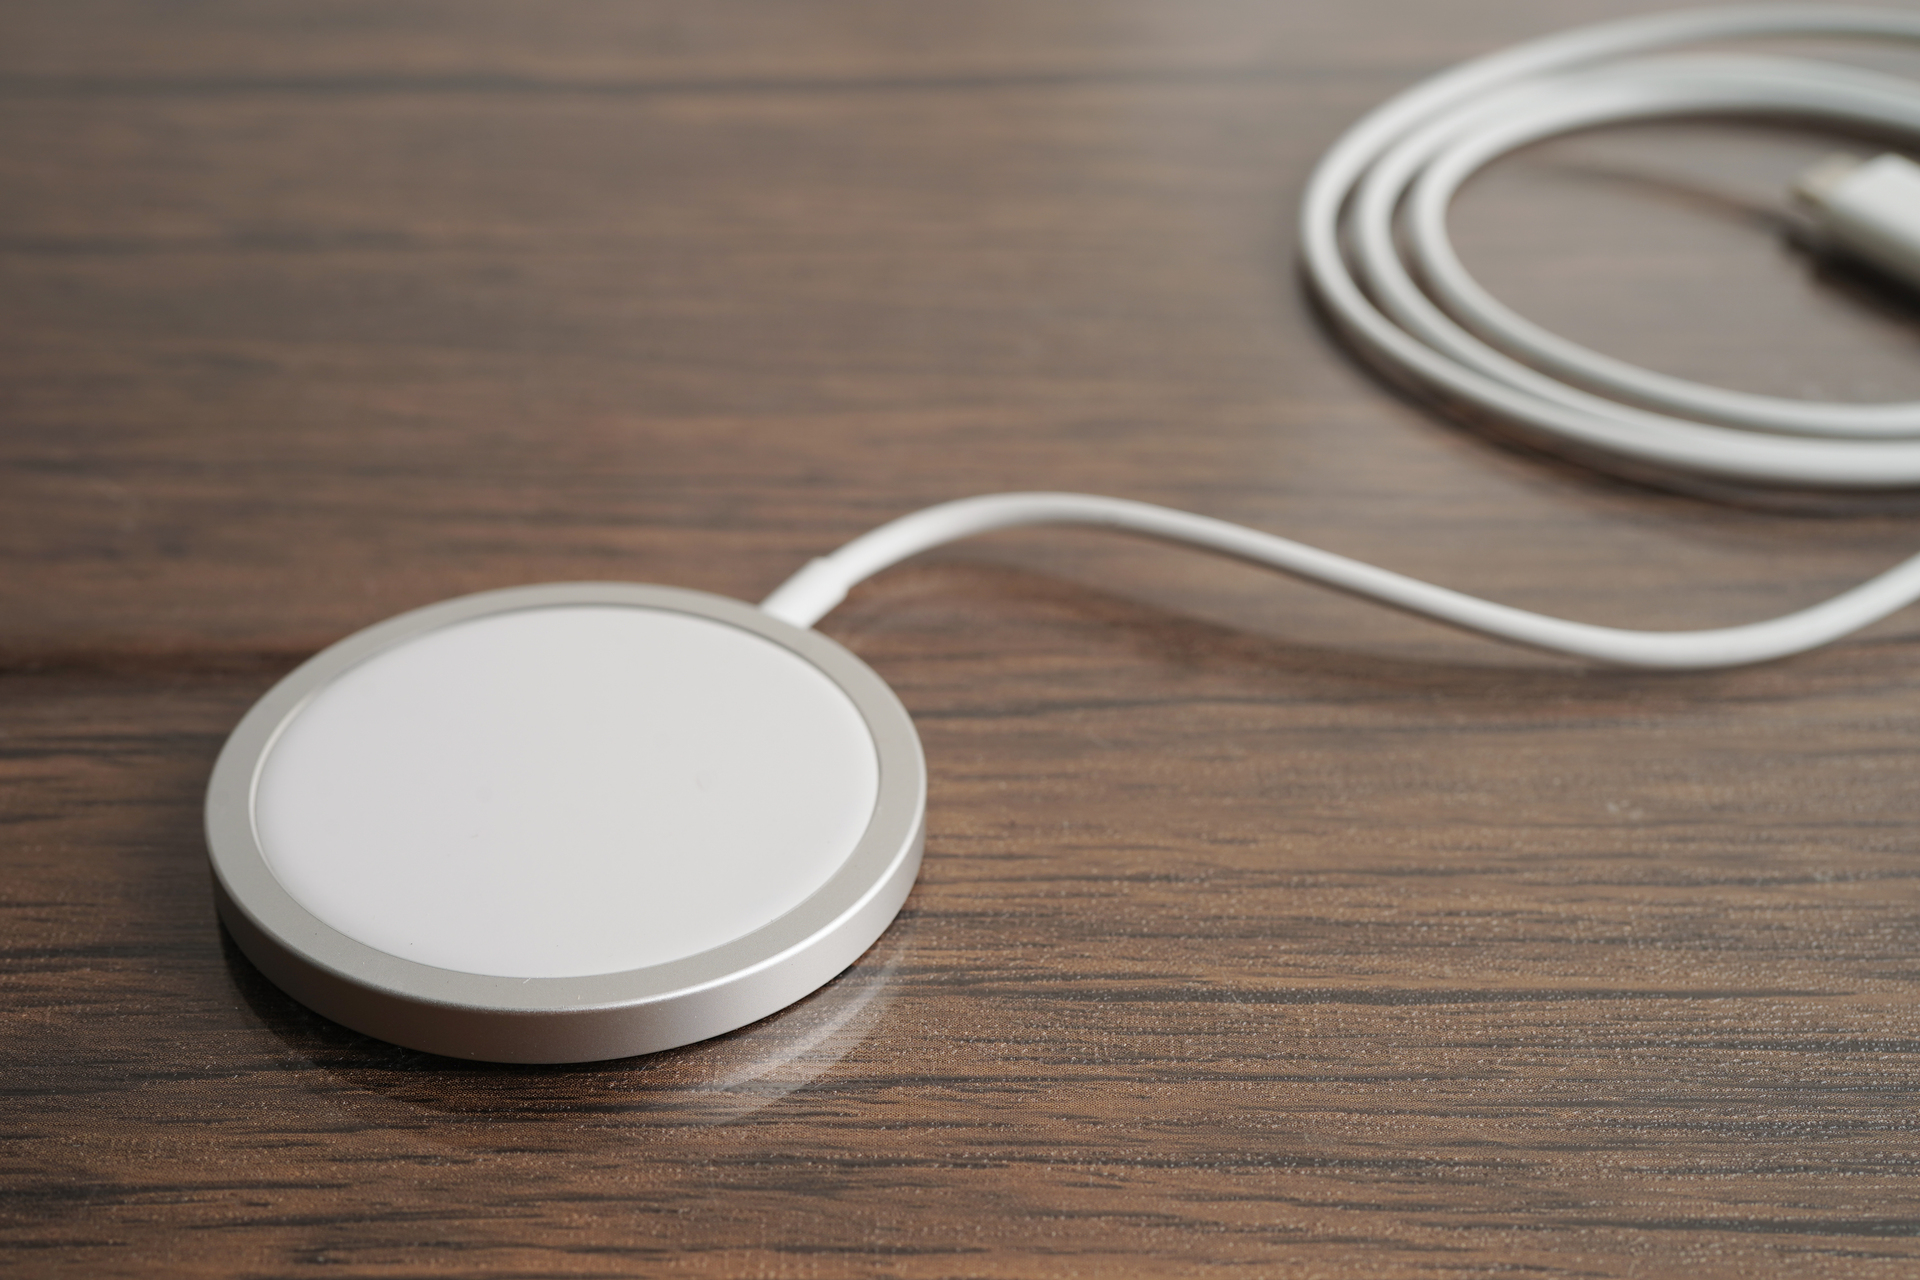 A sleek silver MagSafe charger is captured against a minimalist white background. The charger's circular design features a magnetic attachment point in the center, intended for effortless and secure charging of compatible Apple devices. The charger is connected to a white USB-C cable that trails off the frame, symbolizing its connection to a power source